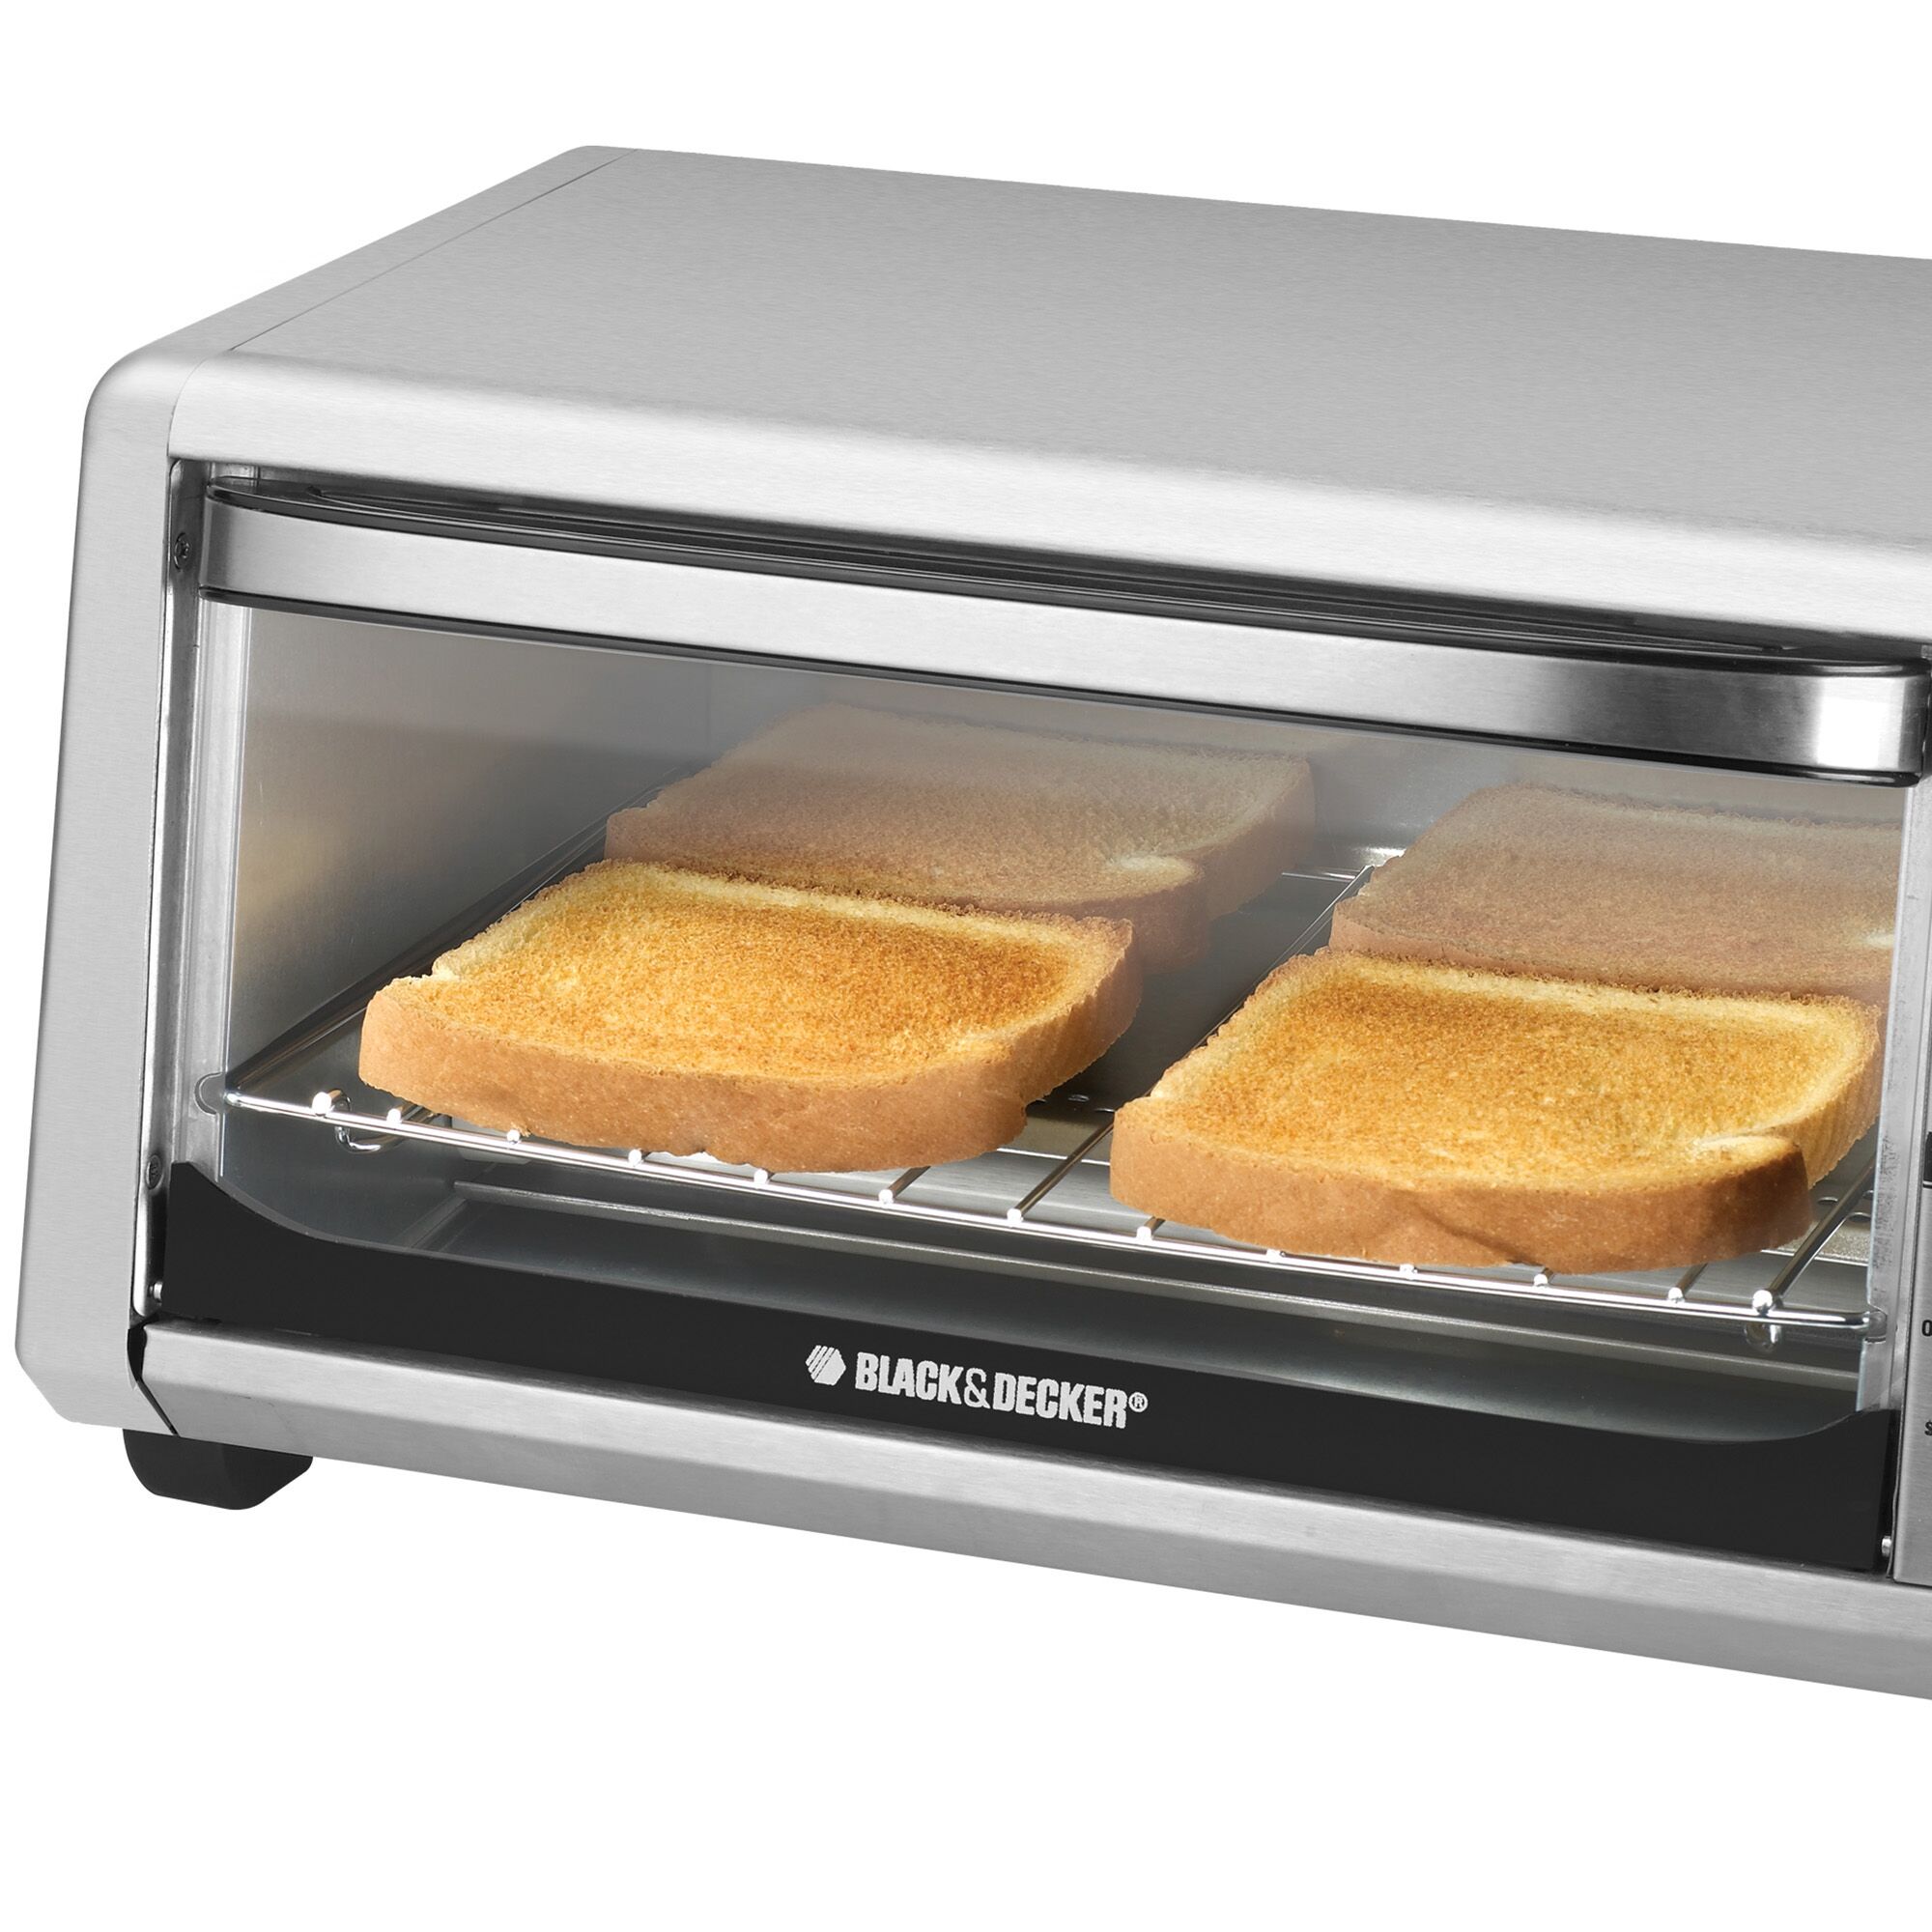 Close-up of toast in the Countertop Toaster Oven.